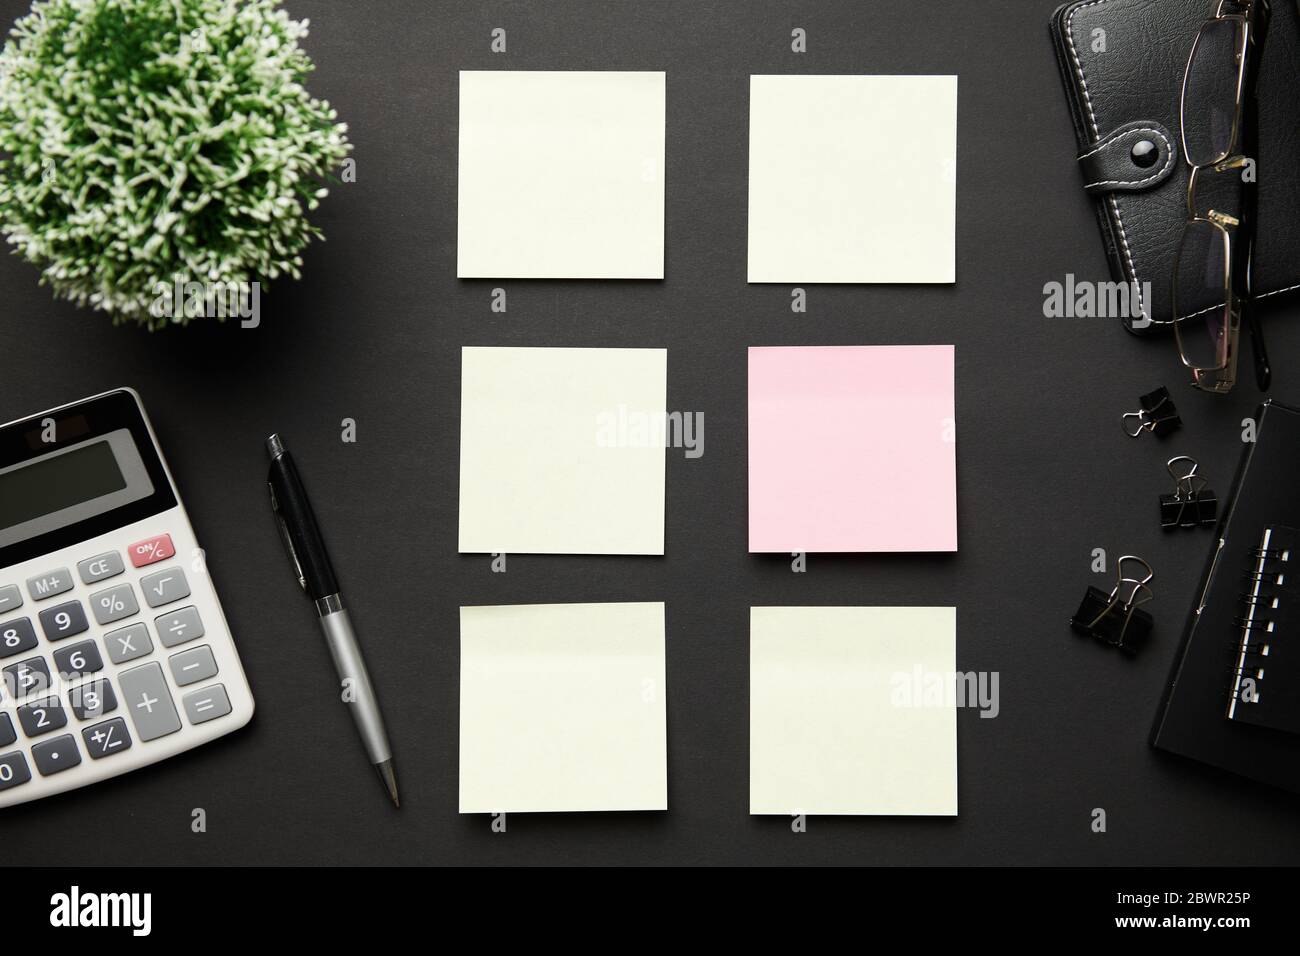 Top view of modern black office desk with calc, notebook, pen, blank sticker and a lot of things. Flat lay table layout. Copy space for text. Stock Photo